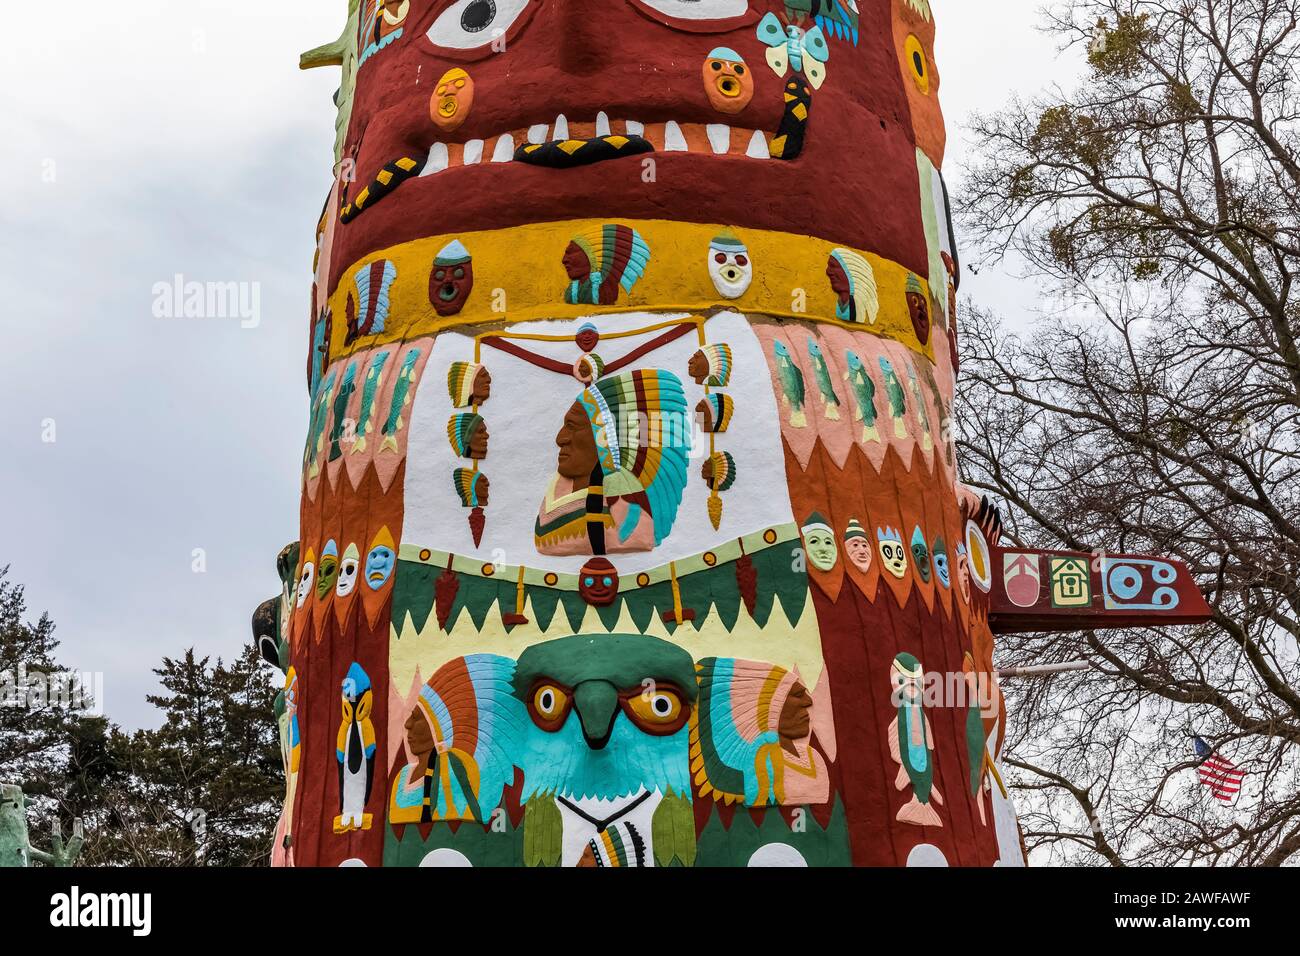 Ed Galloway's Totem Pole Park, filled with folk art totems with an American  Indian motif, along Route 66 near Foyil, Oklahoma, USA [No property releas  Stock Photo - Alamy